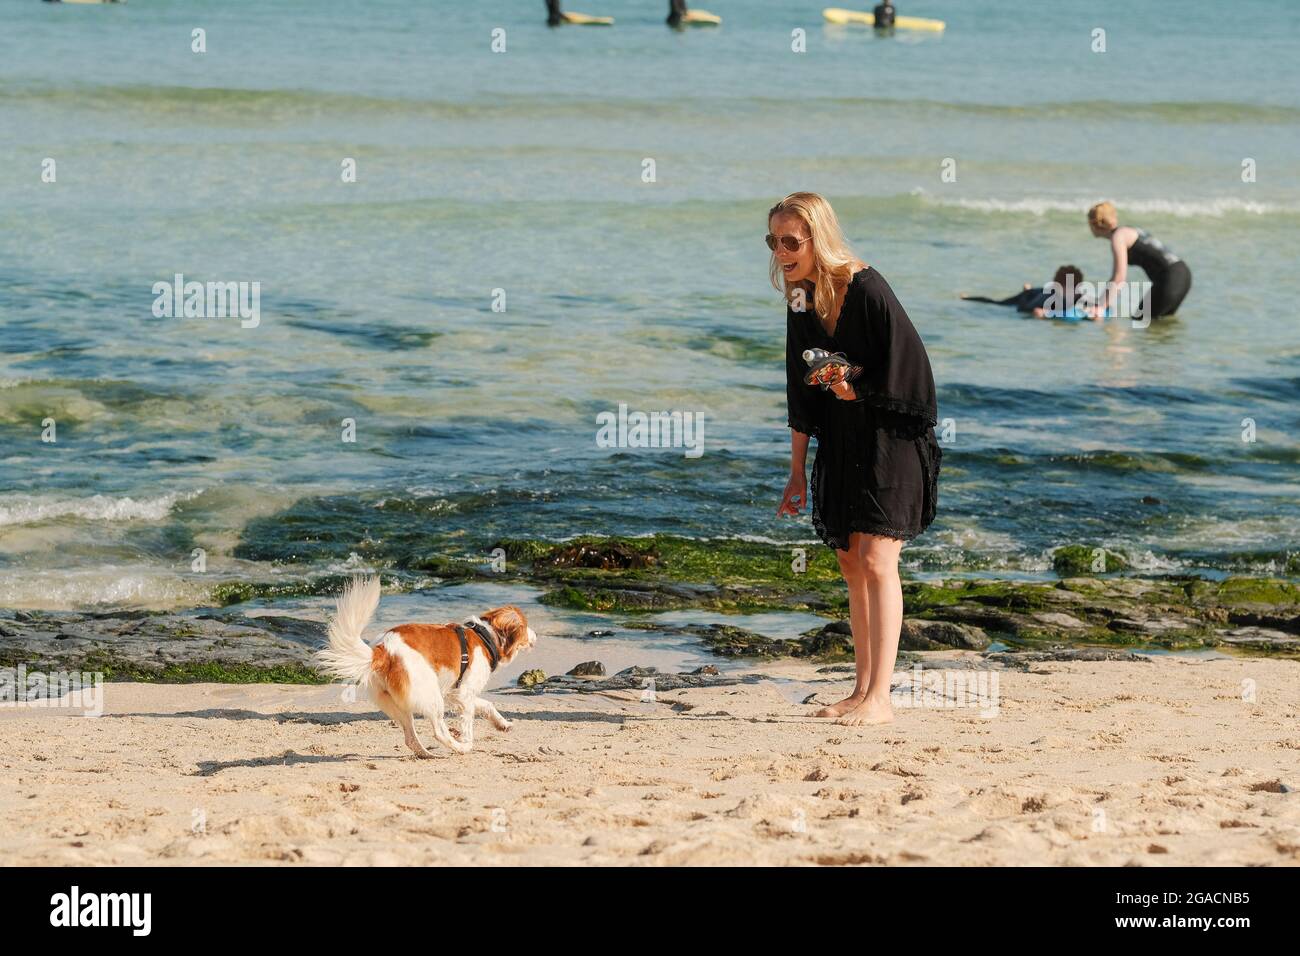 Dog running to woman on beach. St Ives, Cornwall, UK. Stock Photo